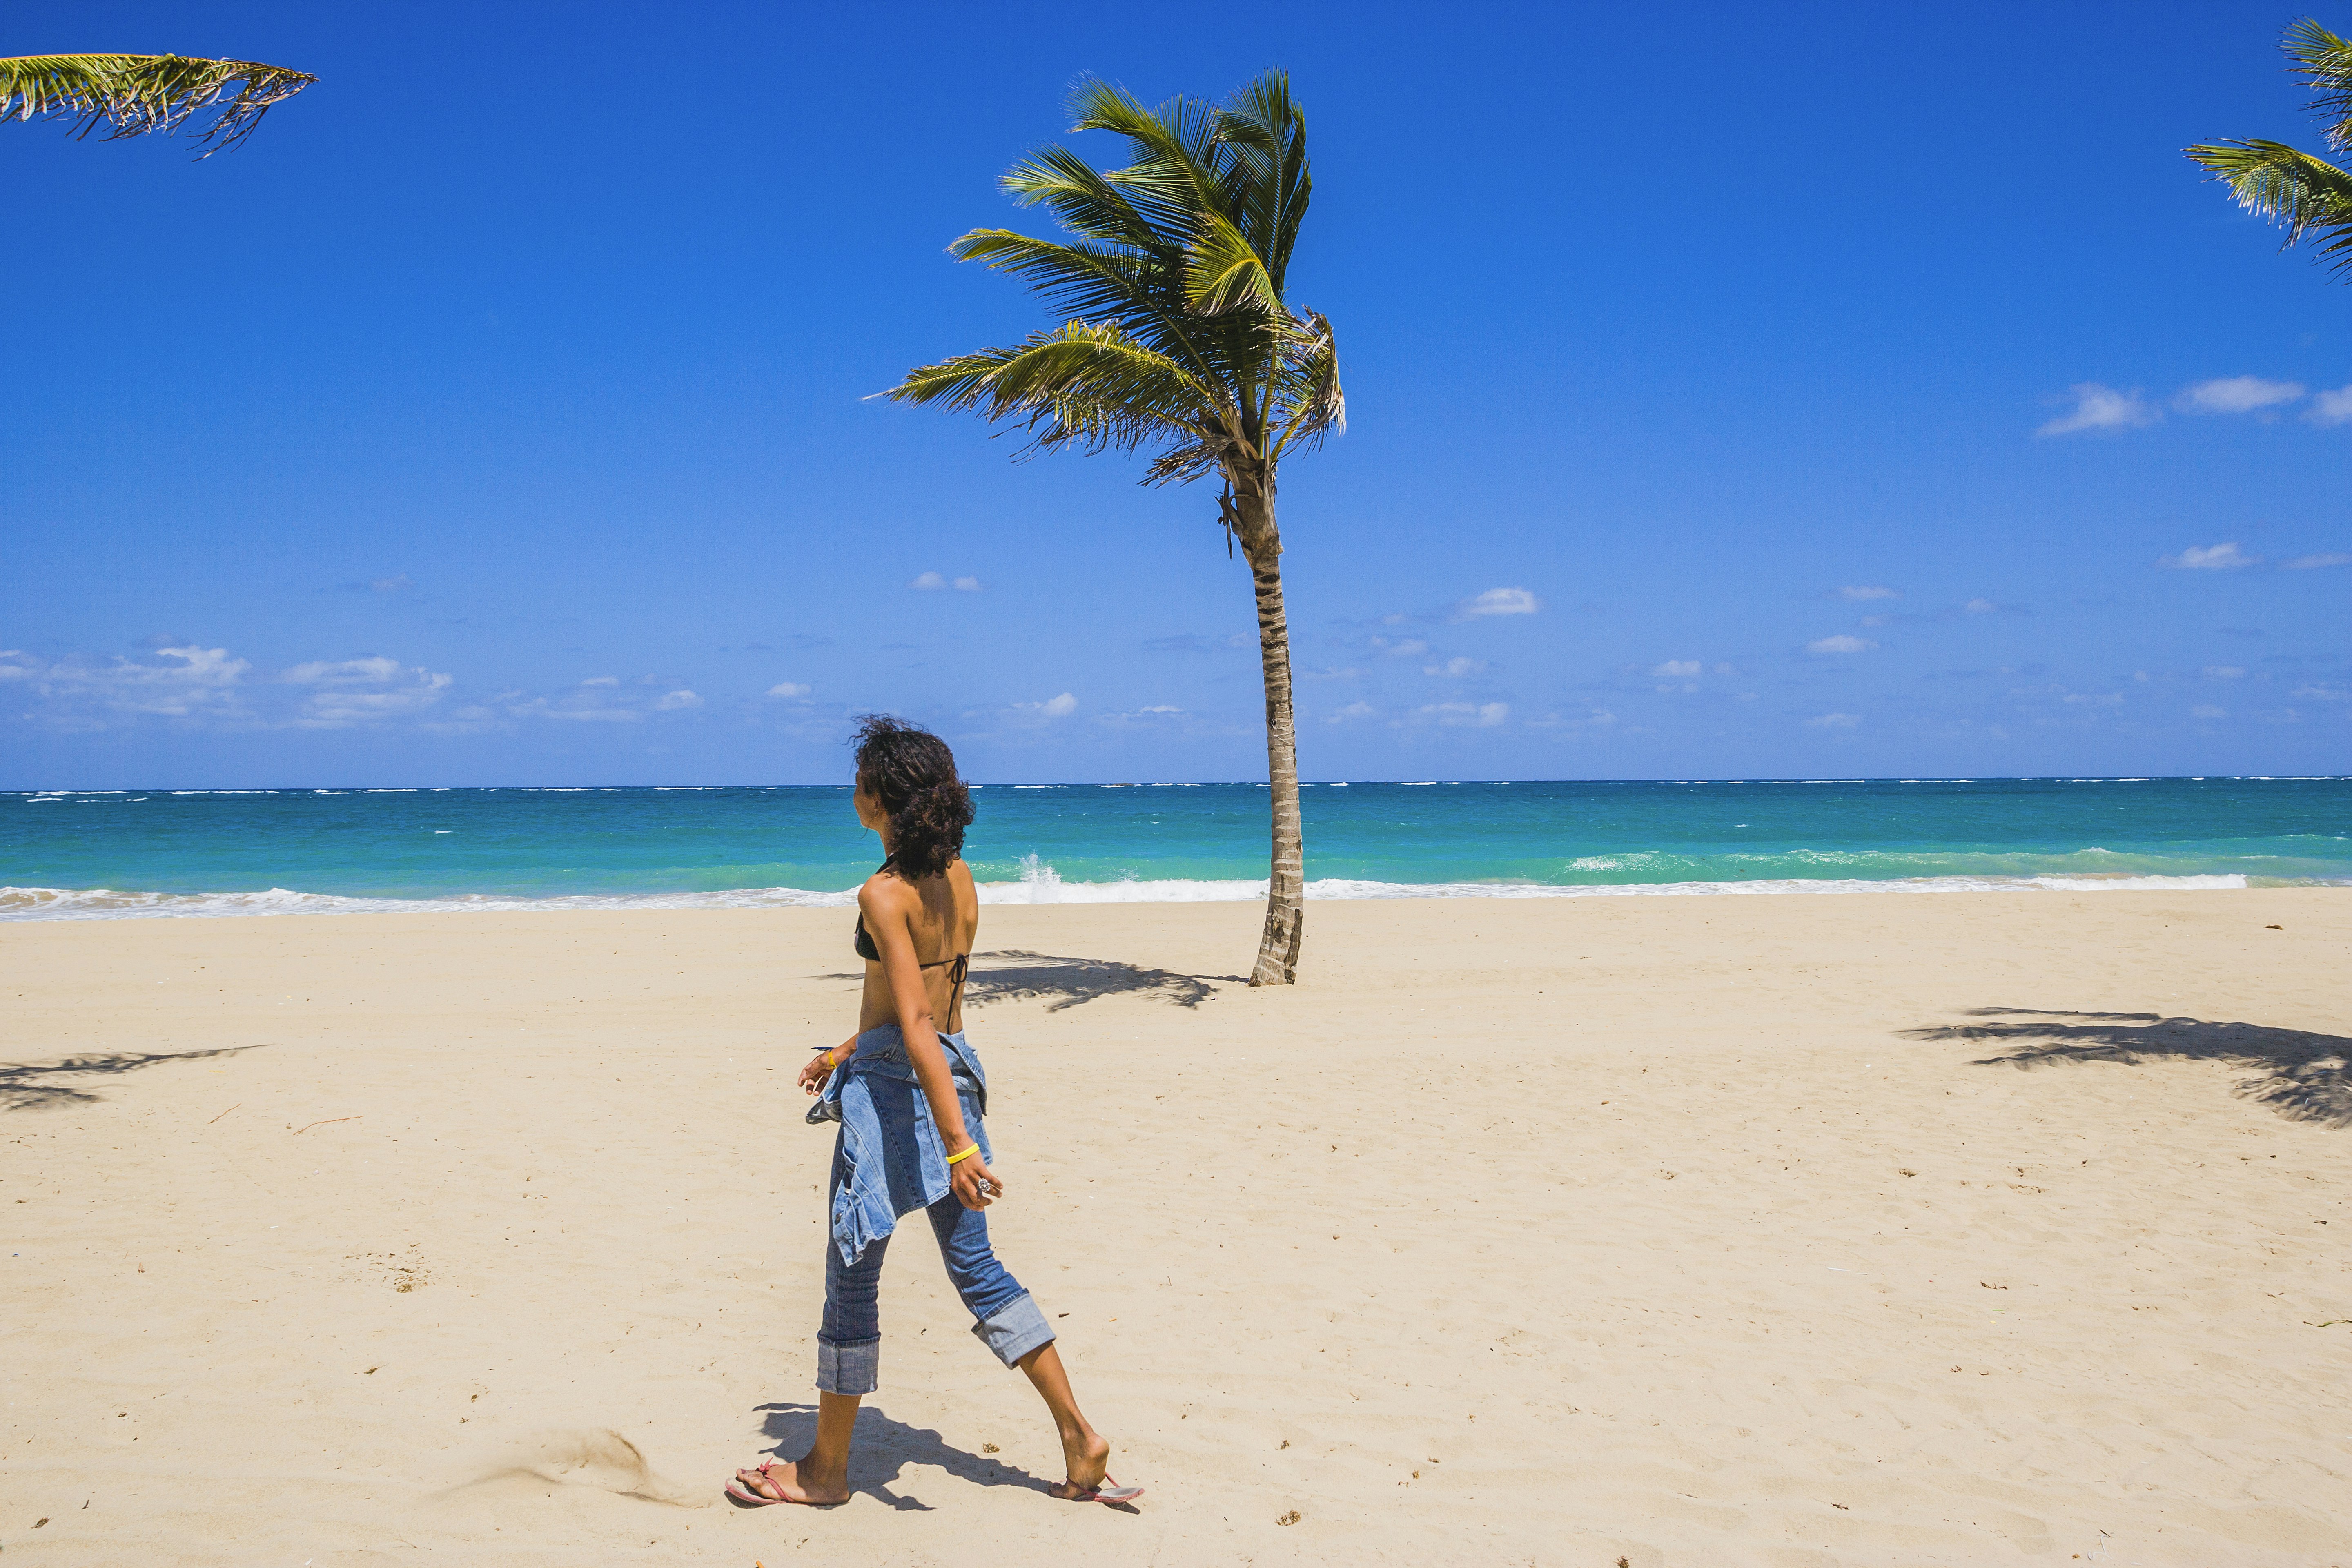 A woman walks past a palm tree on a beach in San Juan, Puerto Rico on a bright sunny day